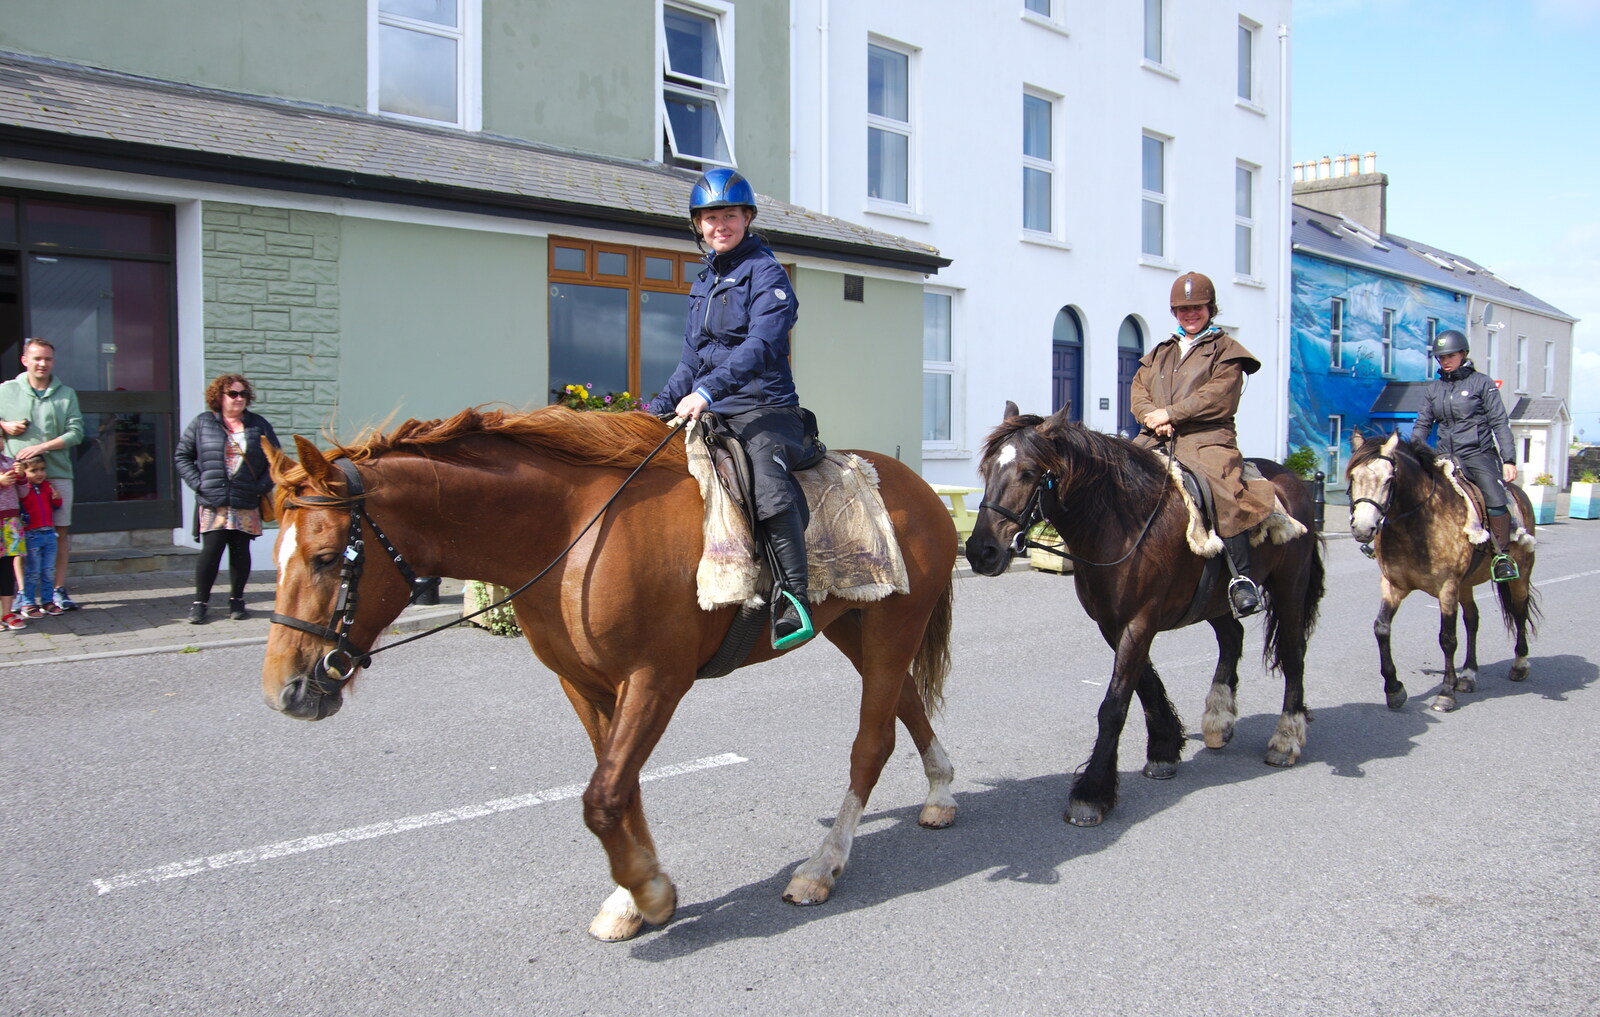 The horses from the beach trot past from Mullaghmore Beach and Marble Arch Caves, Sligo and Fermanagh, Ireland - 19th August 2019